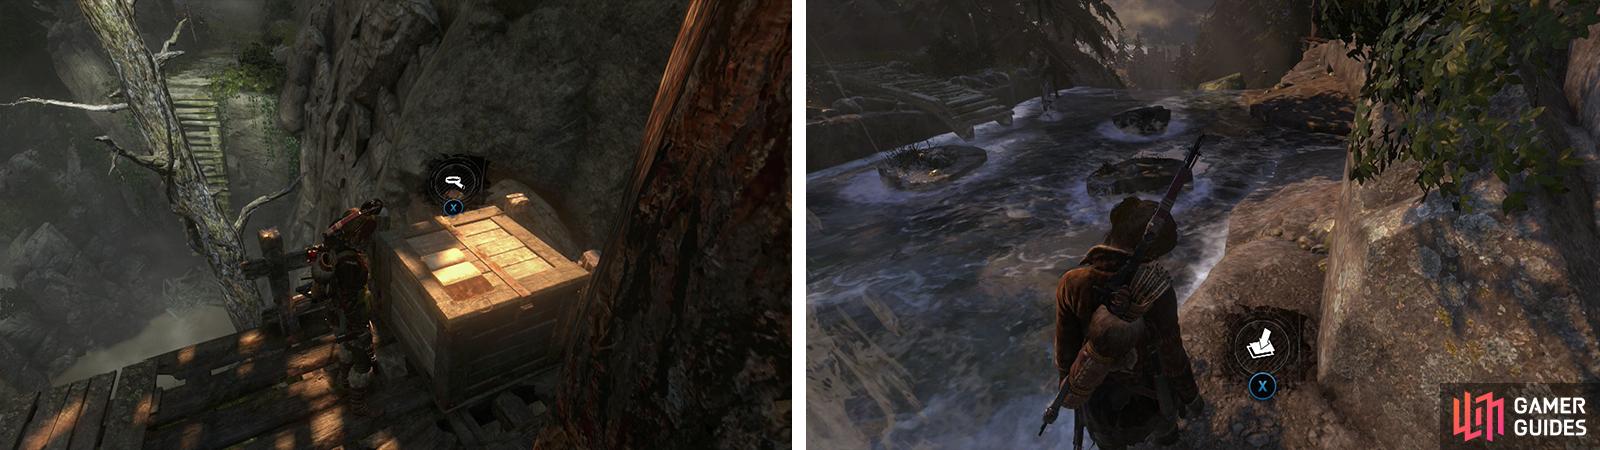 Before crossing the broken bridge, grapple axe up to the wooden platform for a Document 29 (left). Near the waterfall, you'll find Survival Cache 17 (right).